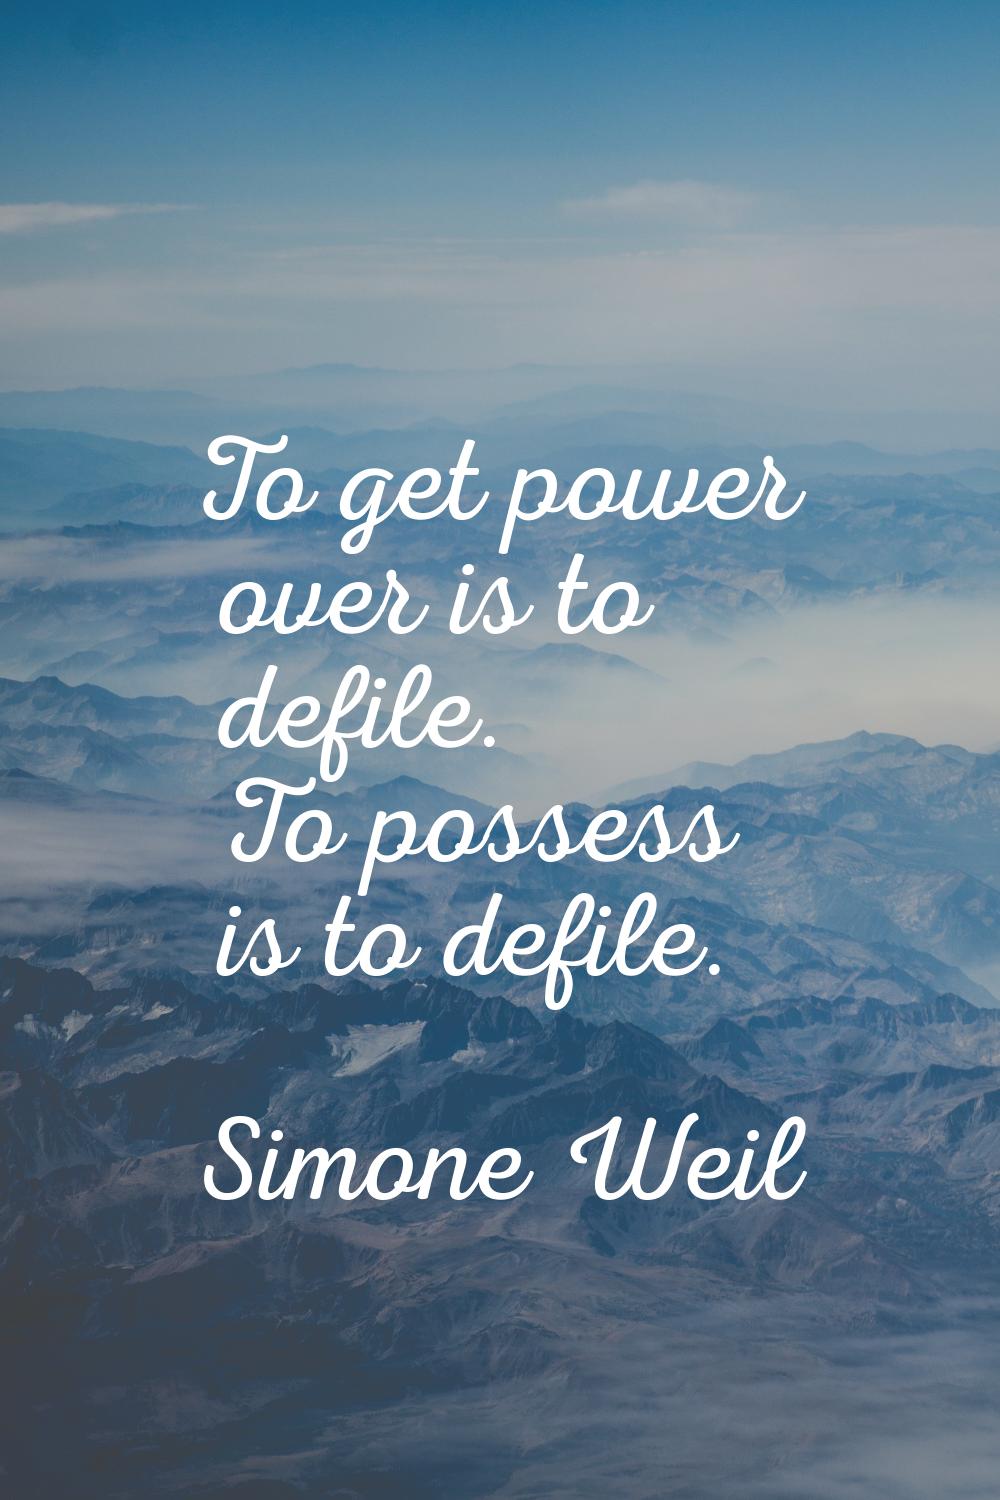 To get power over is to defile. To possess is to defile.